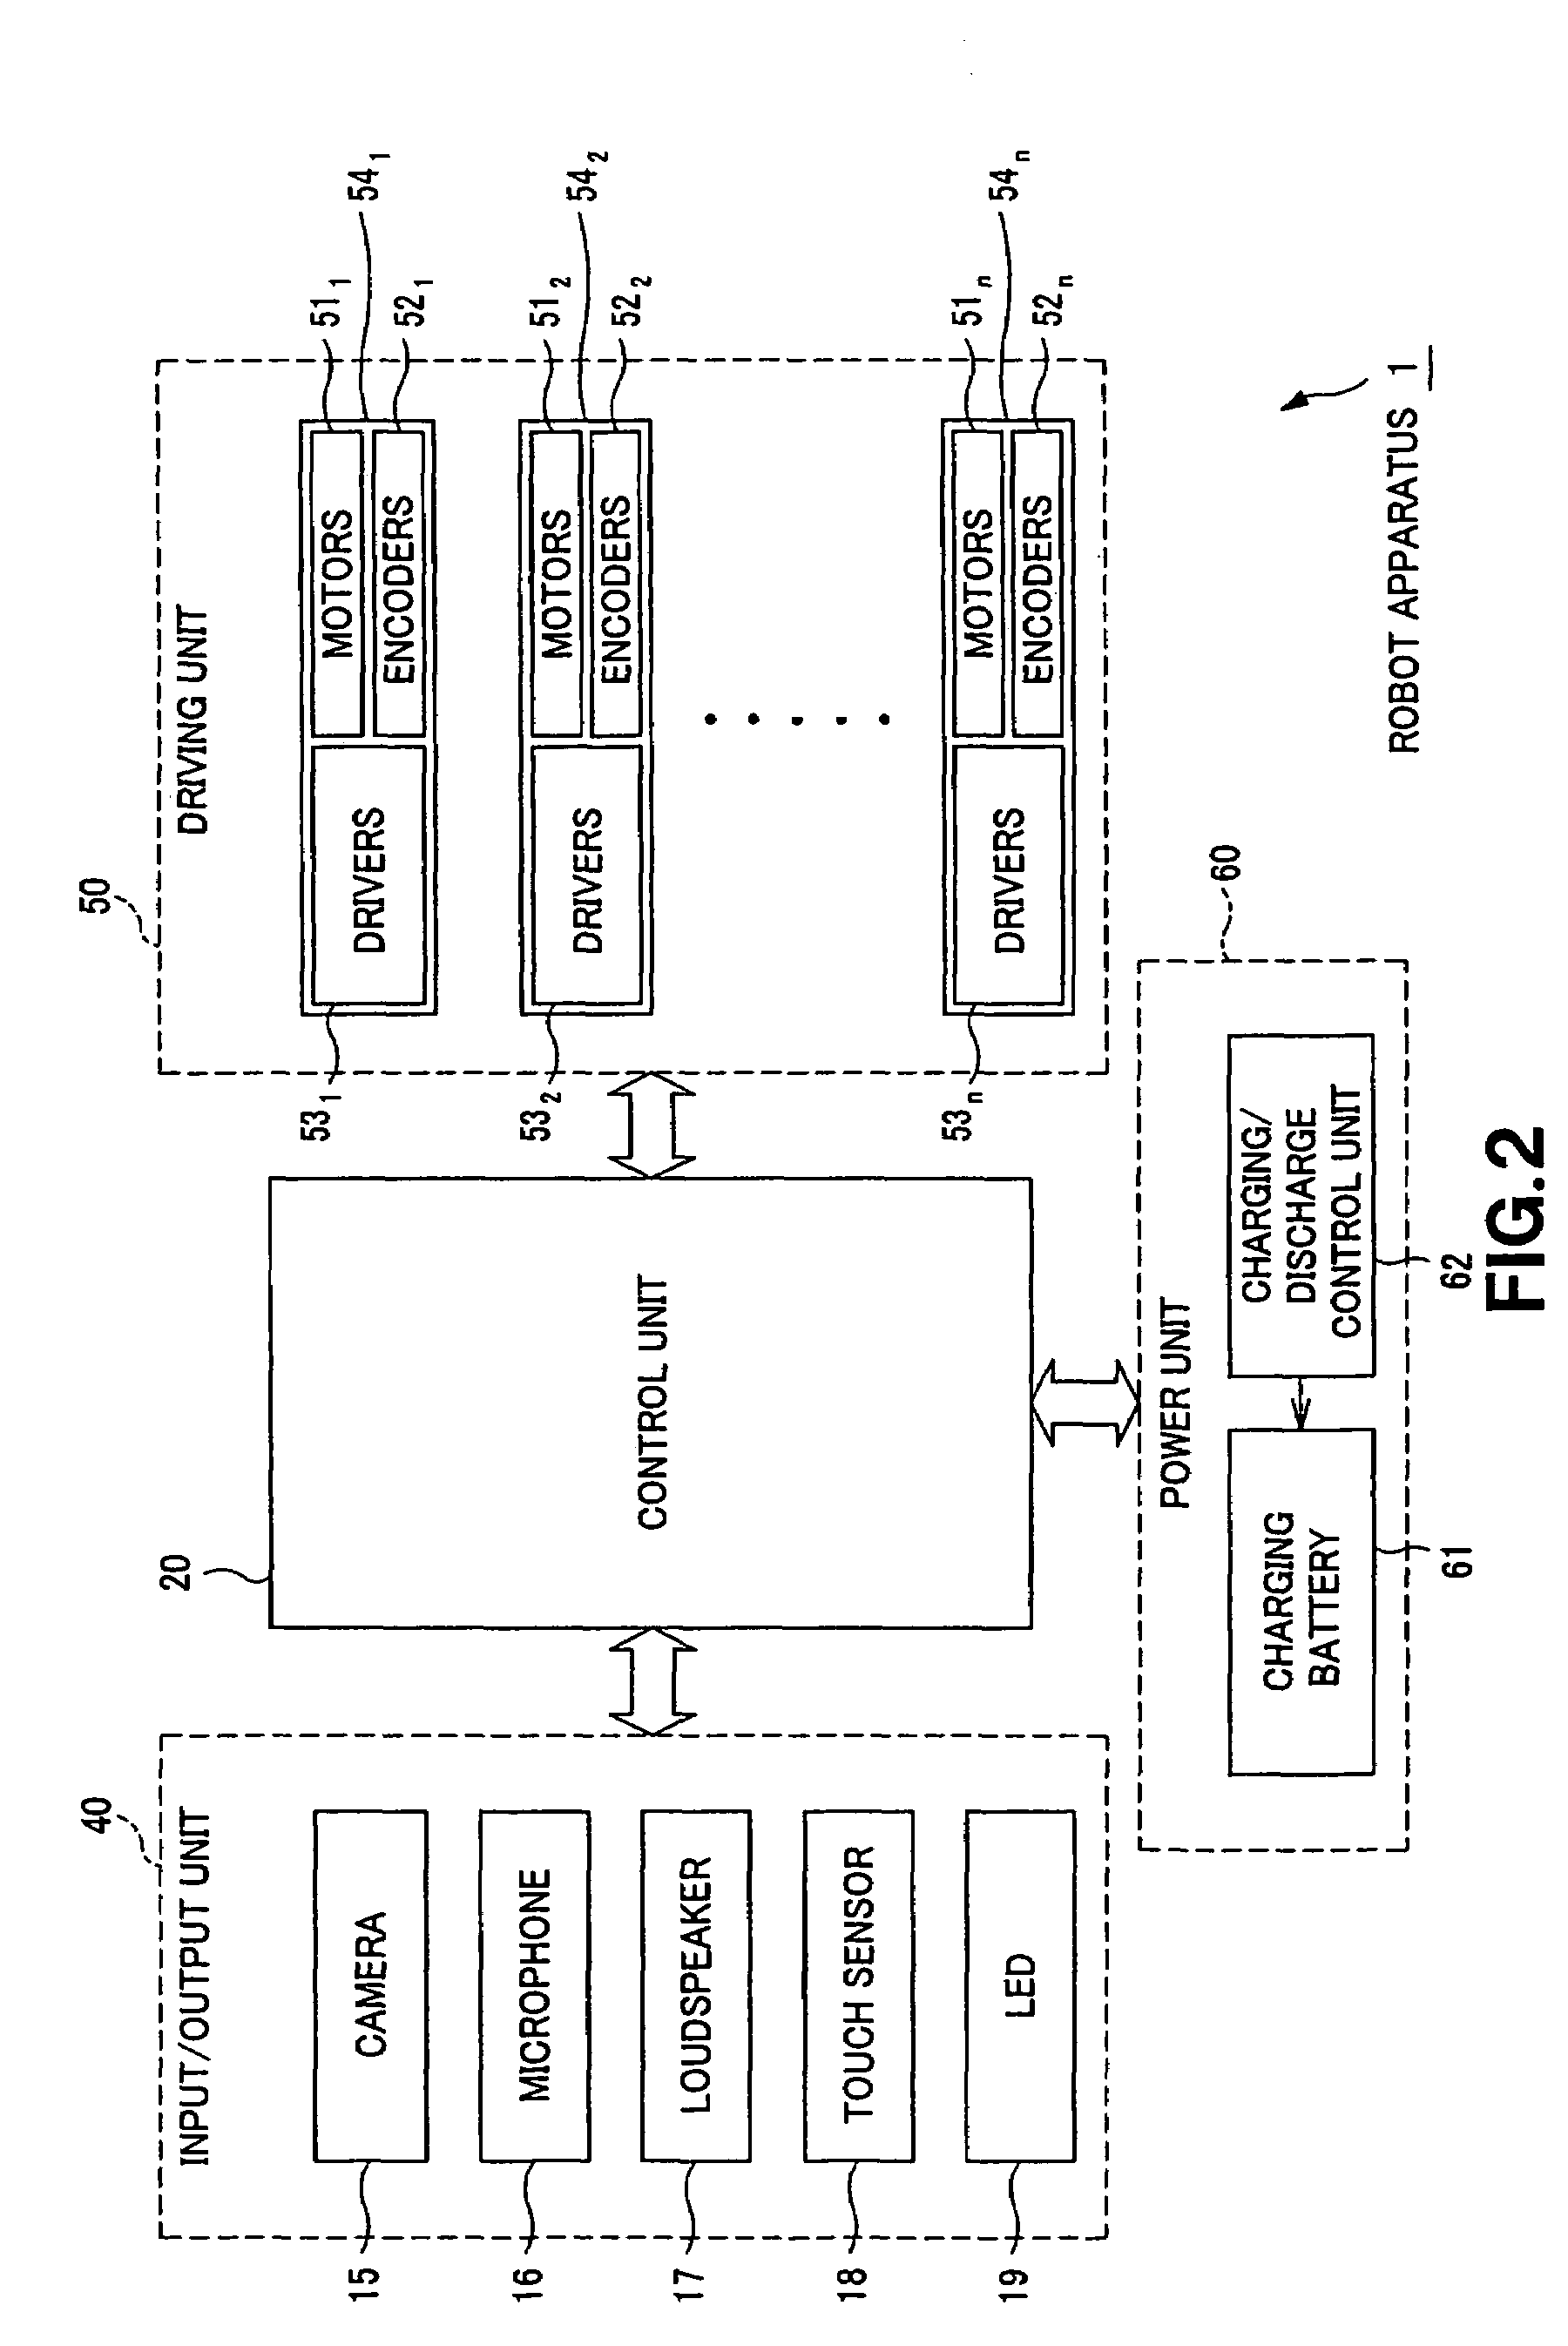 Robot and control method for controlling robot expressions